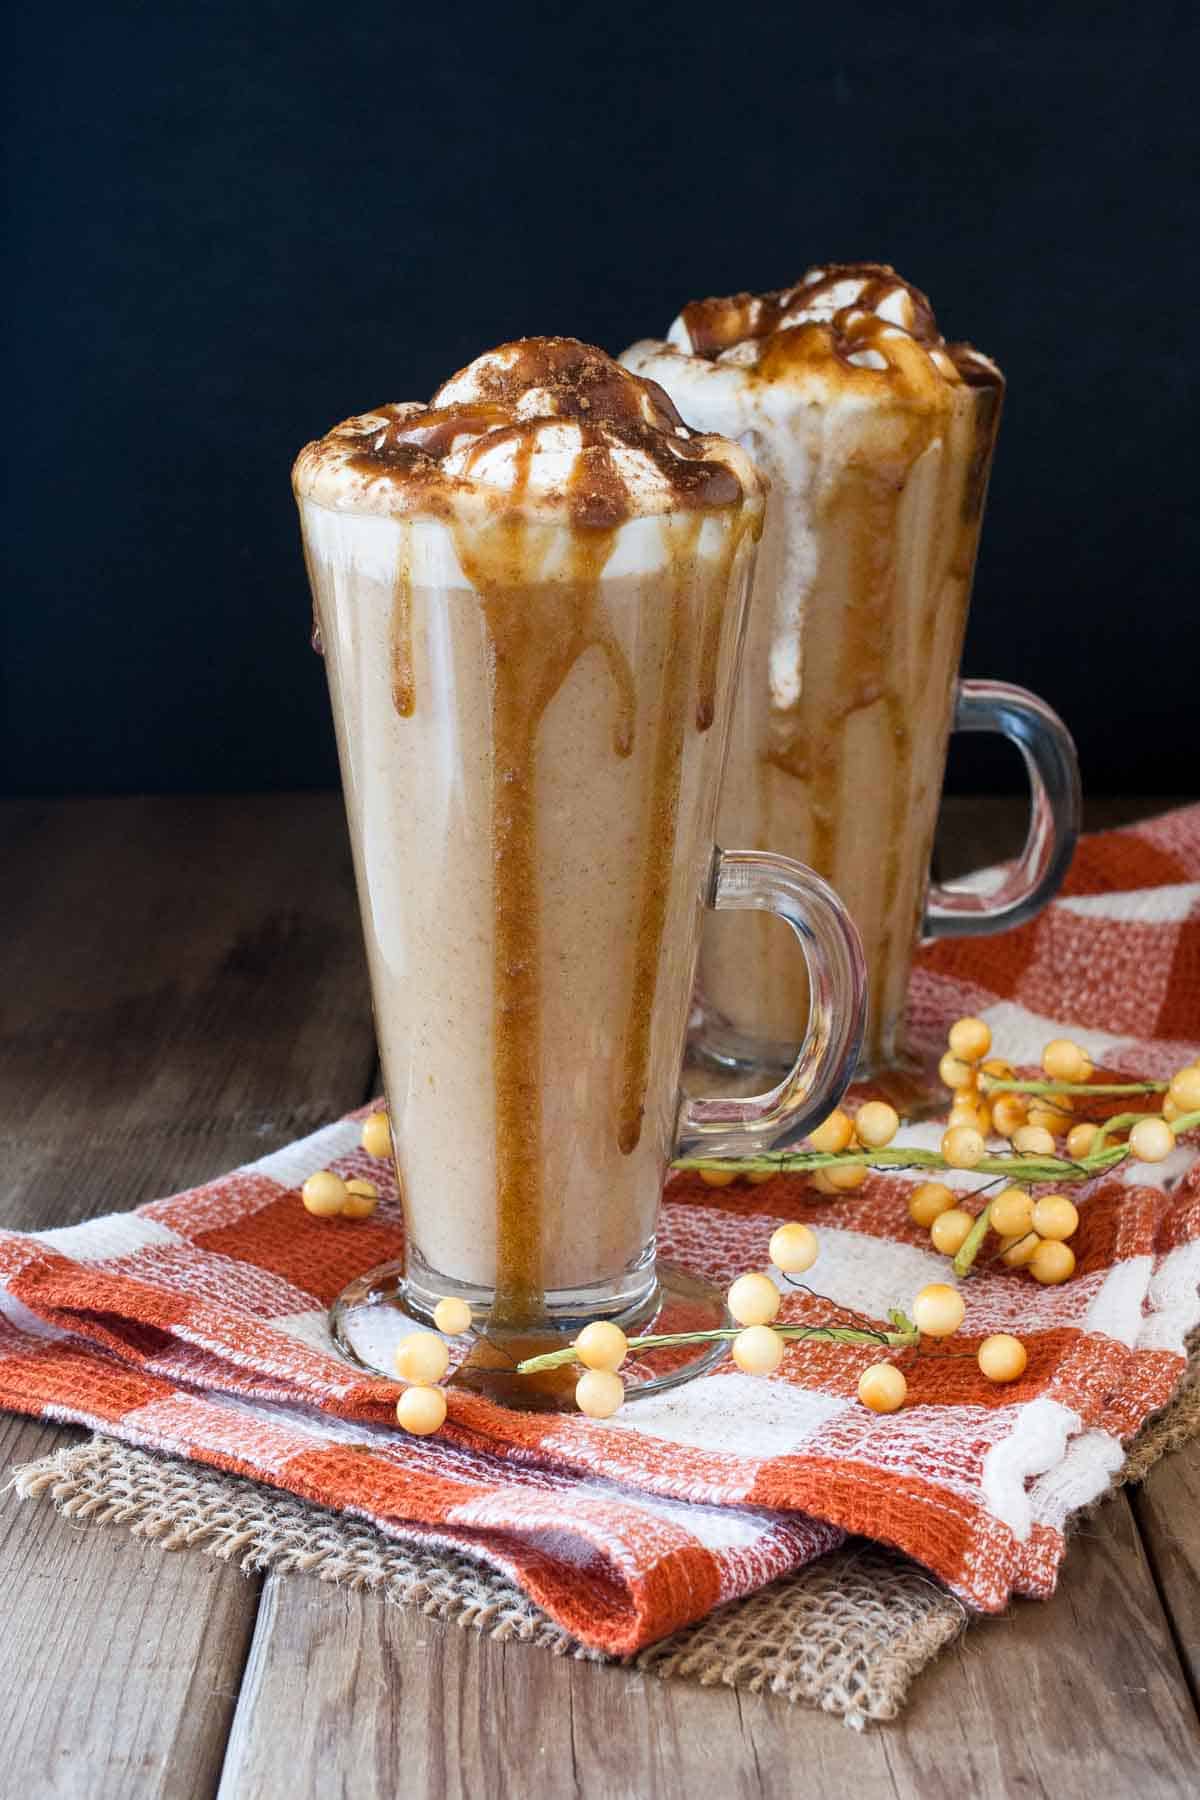 15 Fabulous Fall Beverages | A roundup of fabulous fall drinks that will warm your soul and your stomach! Delicious, healthy beverages that feature all the wonderful flavors of the season. Drink to your heart's content with these wonderful season sips!